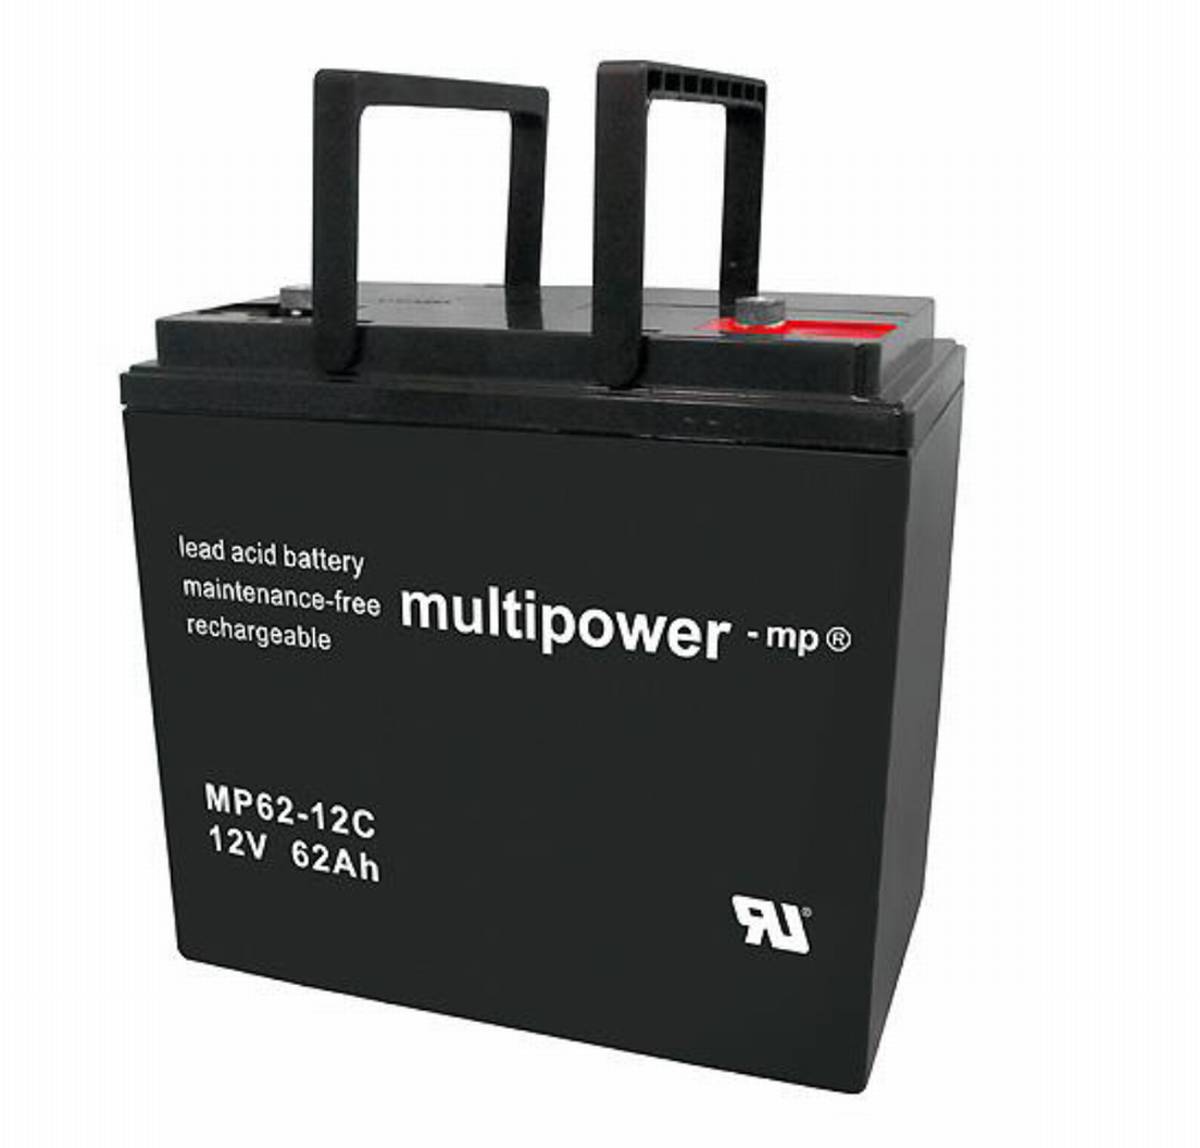 Multipower MP62-12C 12V 62Ah Lead Battery AGM Cycle Type